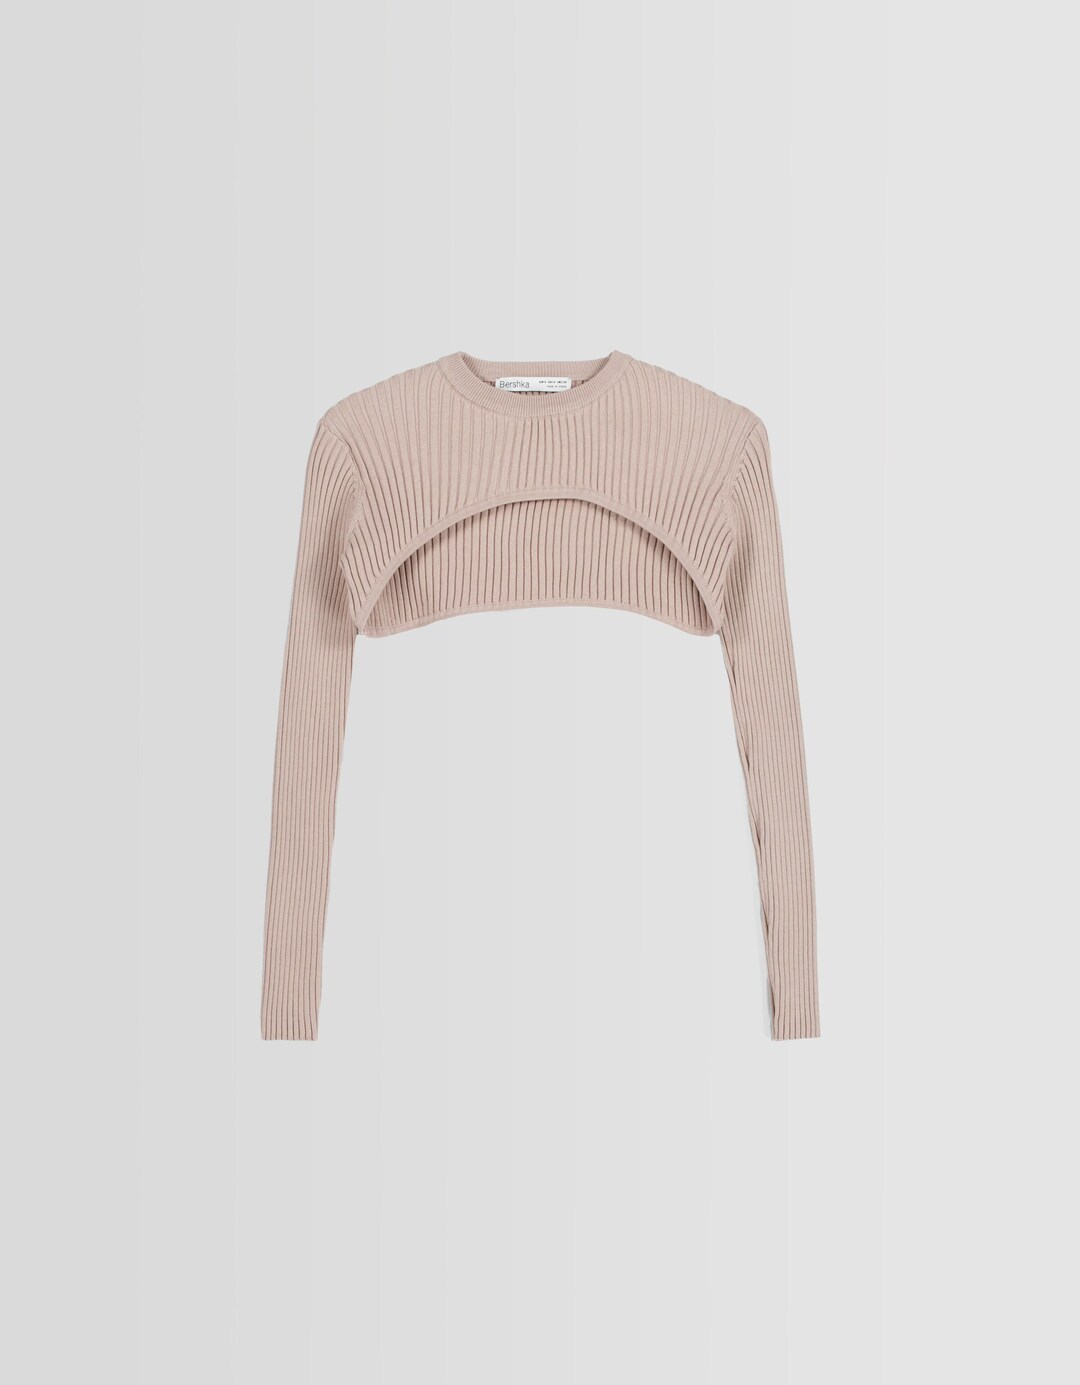 Cropped arm warmer sweater